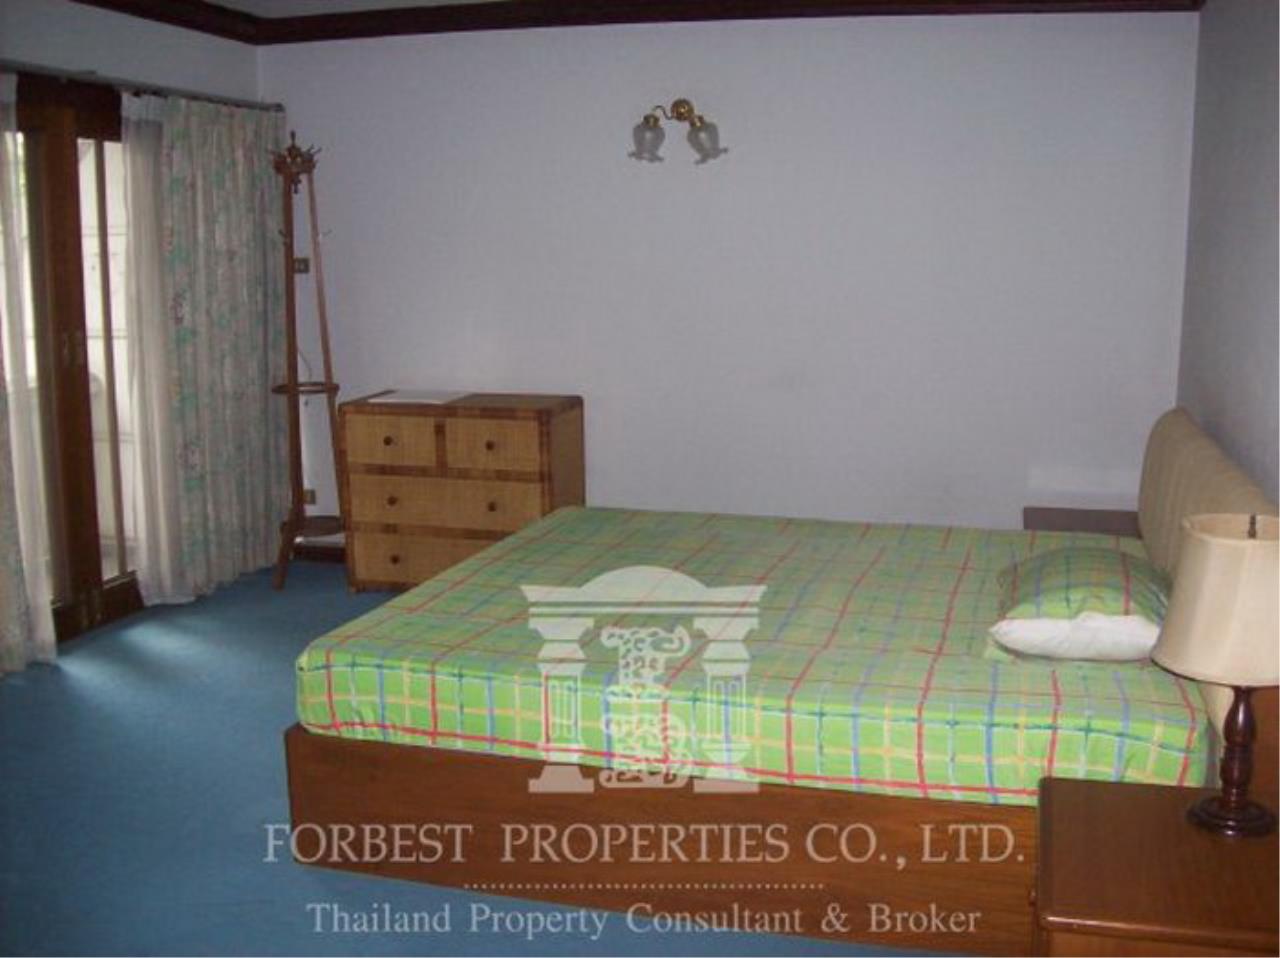 39552 - Phahonyothin 9 Town House For sale 3 Floor Usable area 432 sqm, ภาพที่ 4